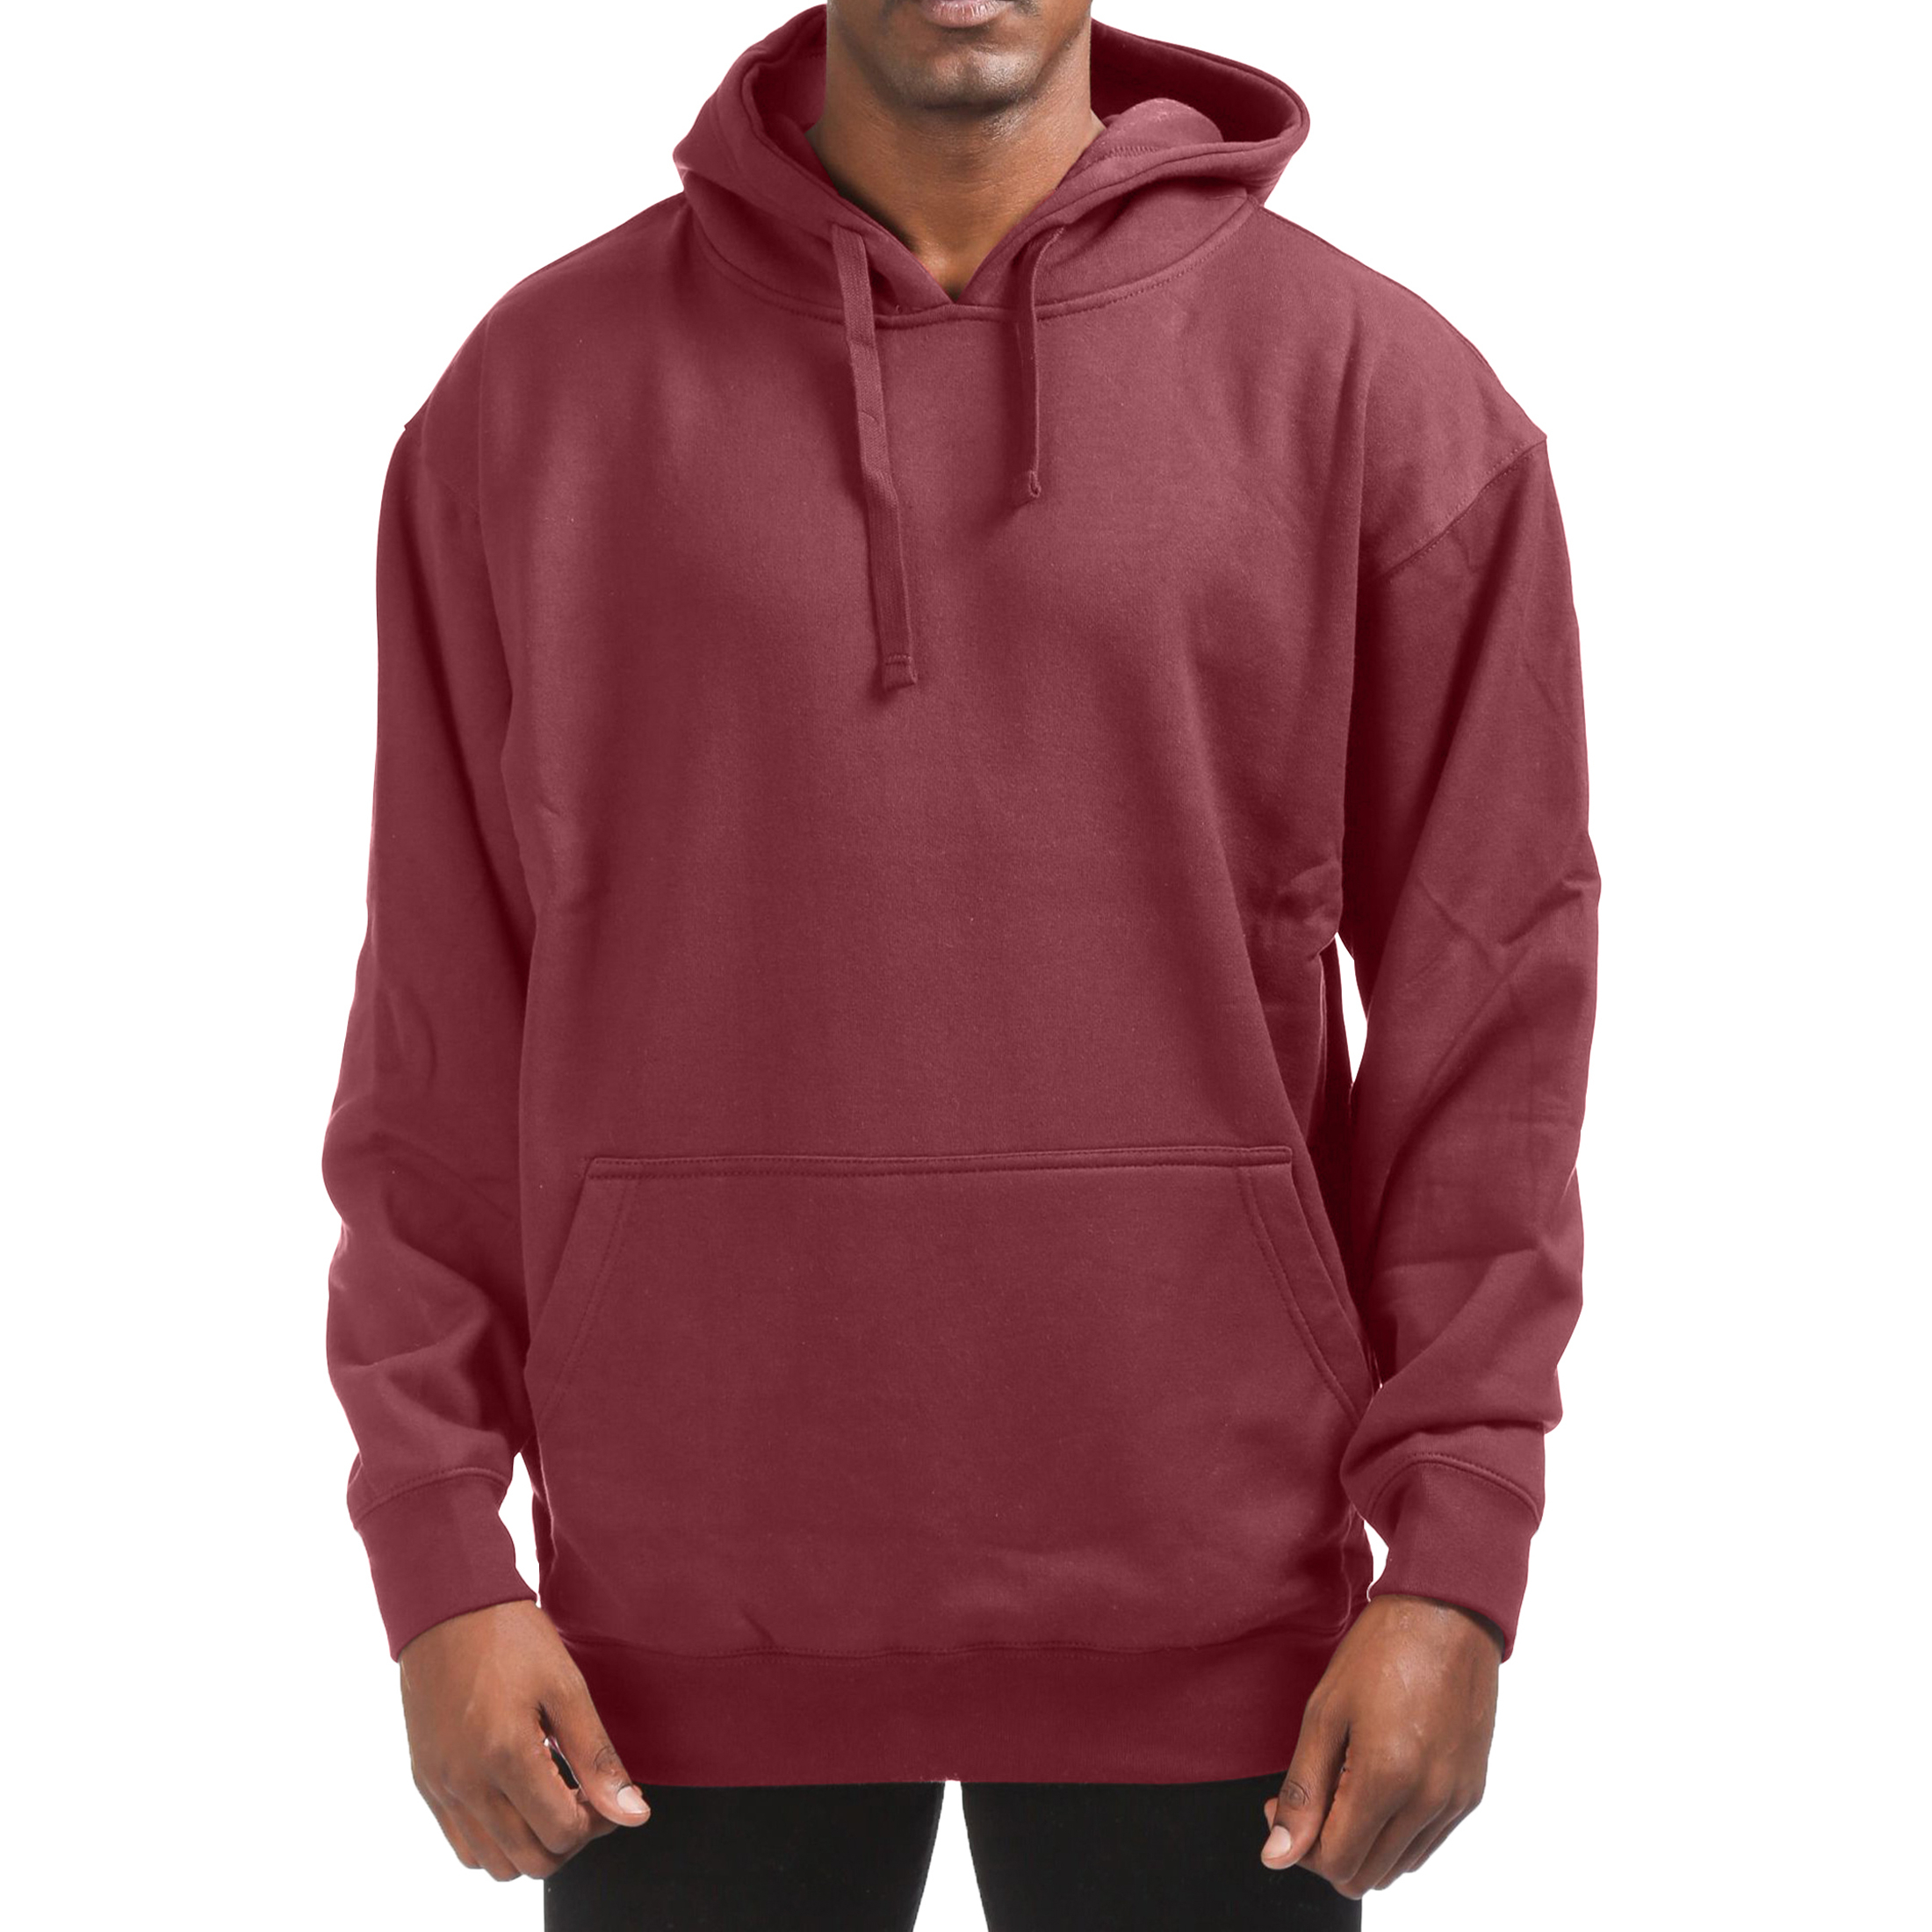 Men's Cotton-Blend Fleece Pullover Hoodie With Pocket (Big & Tall Sizes Available) - Burgundy, Medium